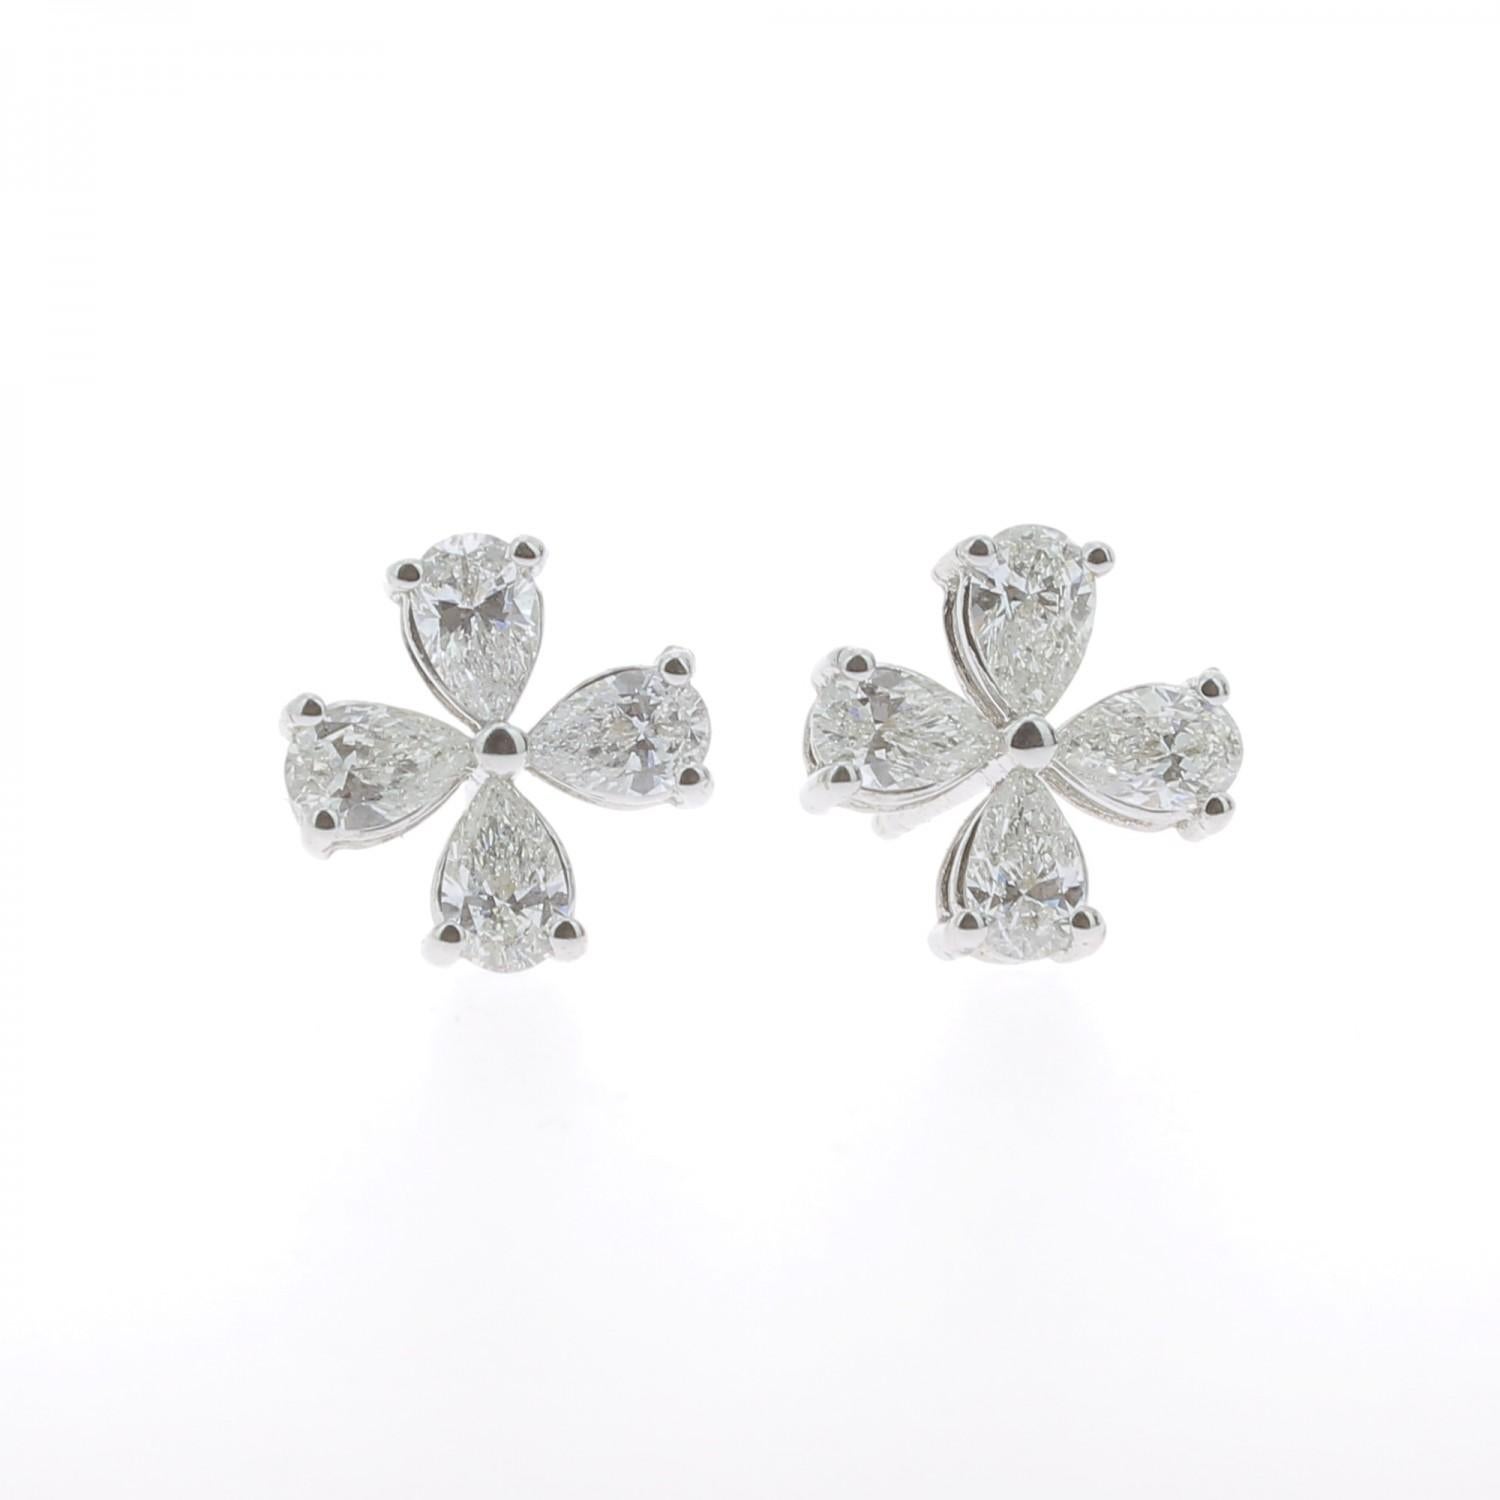 The Clover Diamonds Earrings are set with 8 Pear Diamonds weighing 1.20 Carat
The Earrings are set with 8 Pear Diamonds with a clover pattern.
The Diamonds are GVS quality.
The Hoop Earrings is  18K White Gold and weight 2.66 Grams